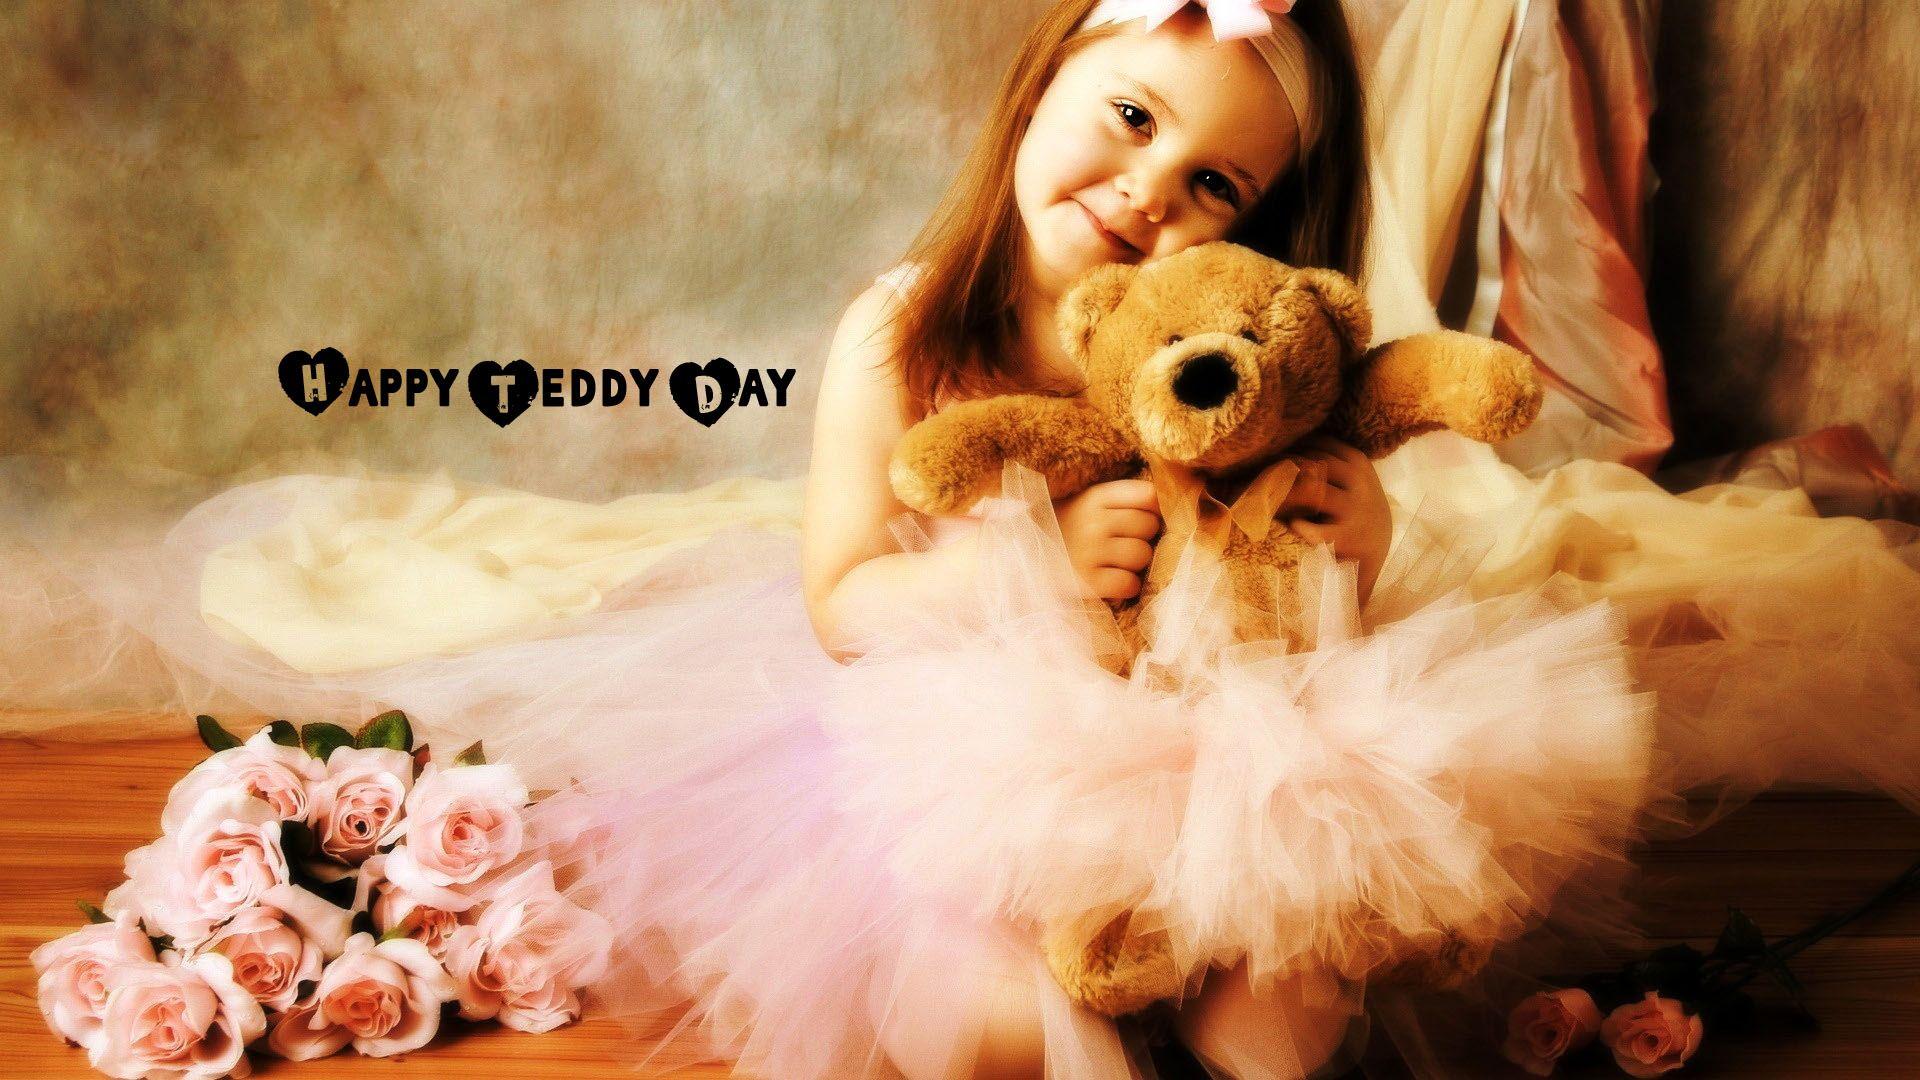 image For Teddy Day